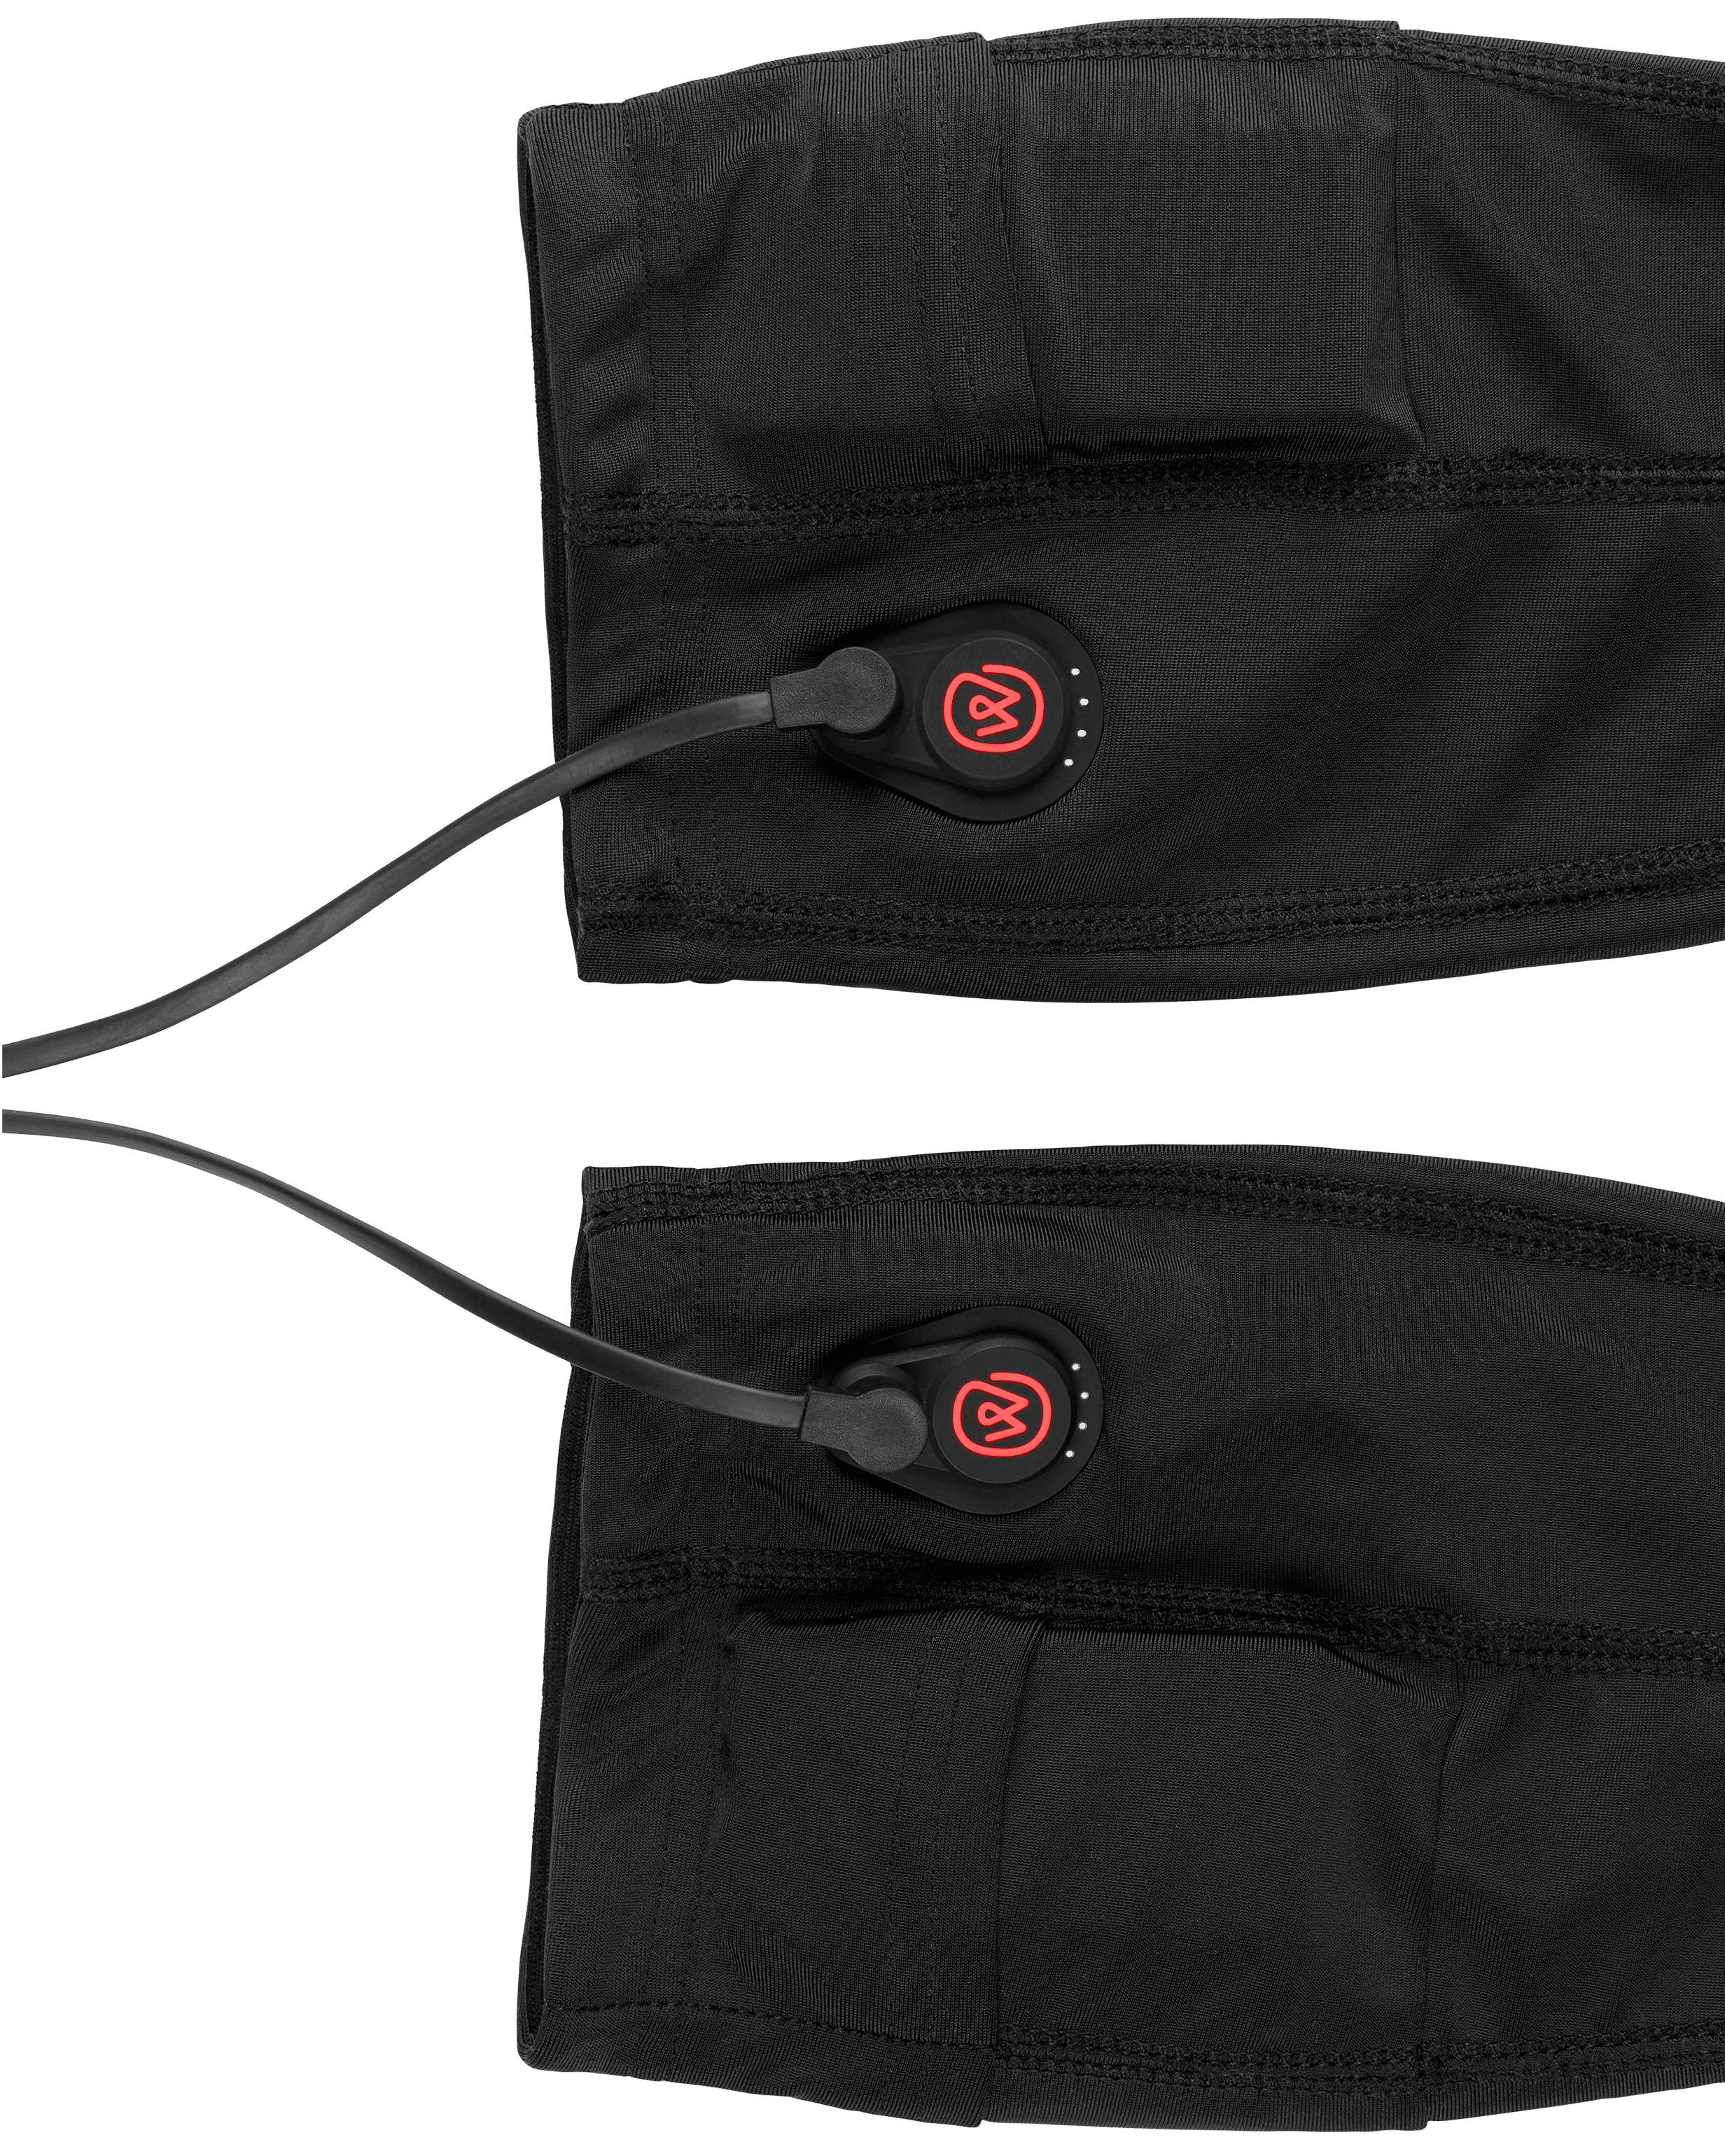 SnapConnect Heated Sock Covers (Open Box)